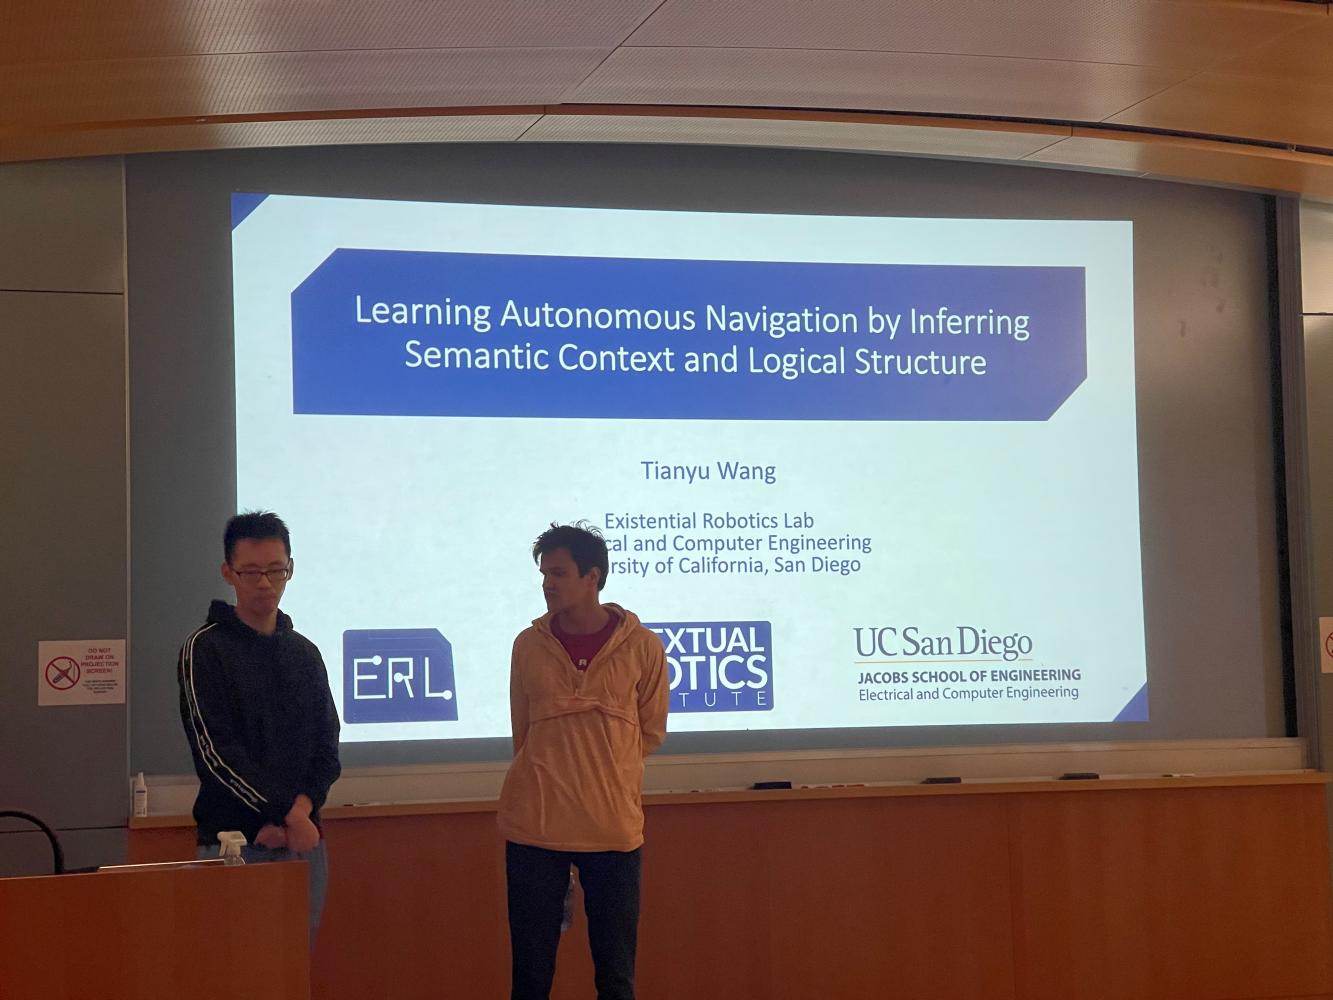 A RoboGrads member introduces the Feed the Intellect speaker in front of a projected slide reading "Learning Autonomous Navigation by Inferring Semantic Context and Logical Structure"